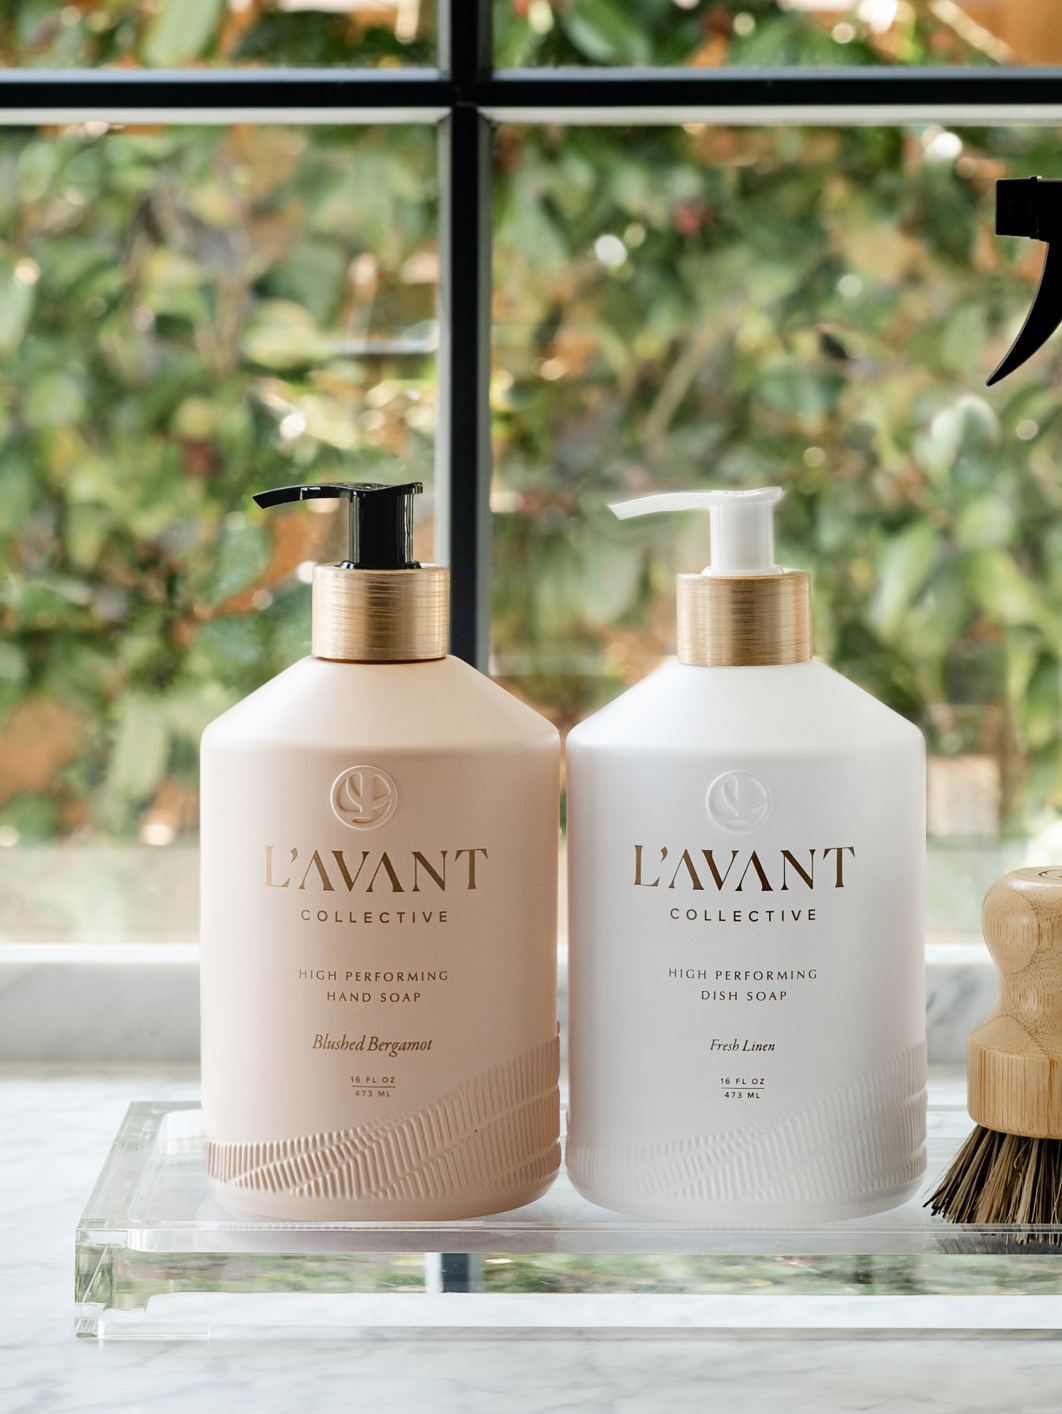 L'AVANT Collective High Performing Dish Soap- Blushed Bergamot